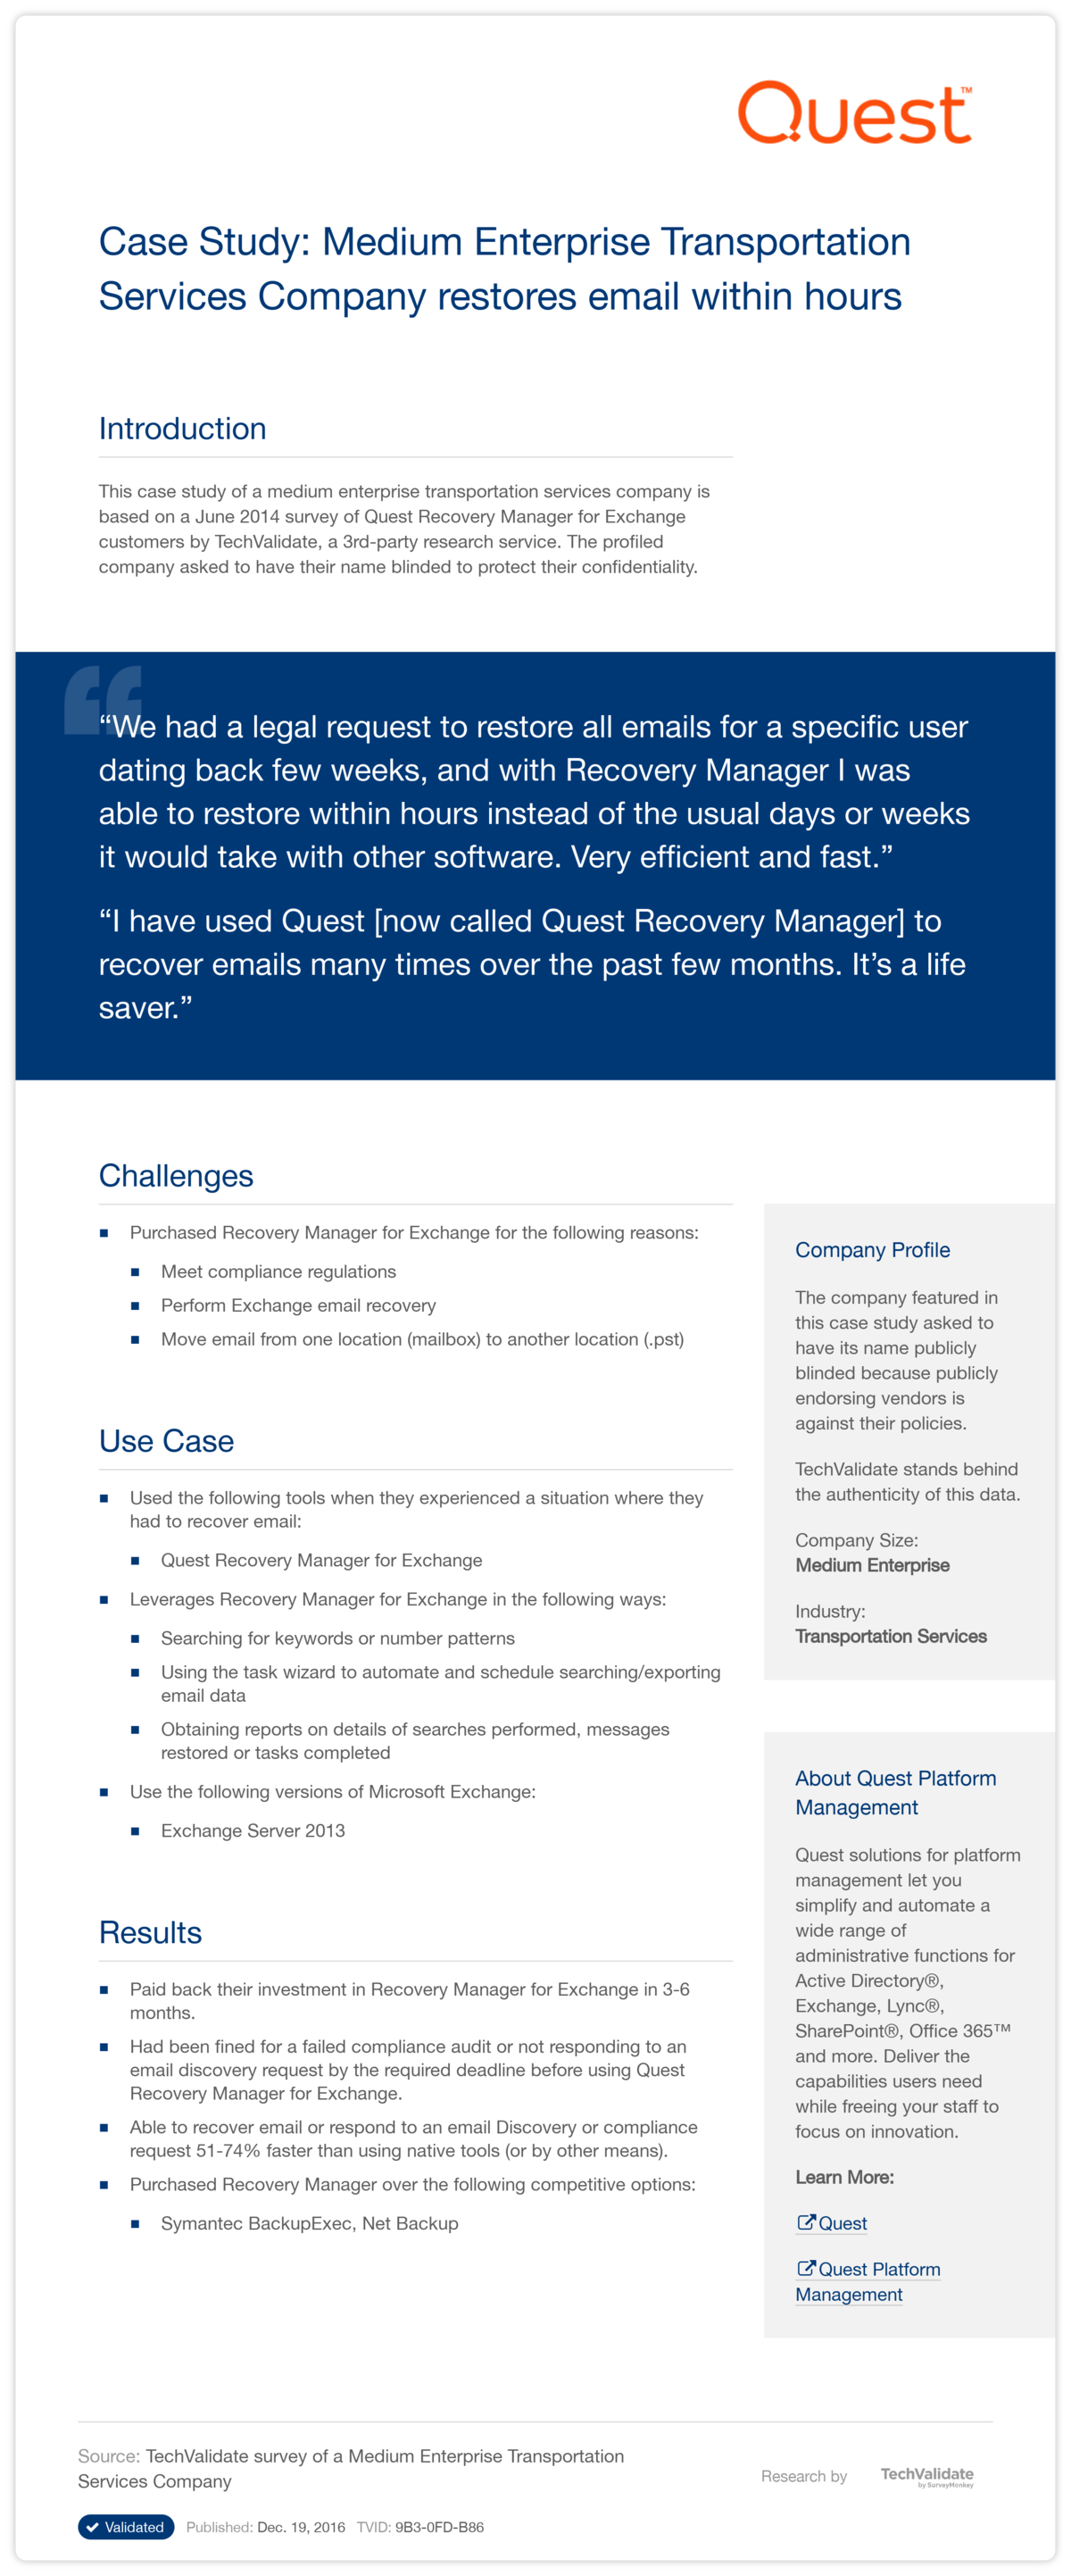 Case Study: Medium Enterprise Transportation Services Company restores email within hours